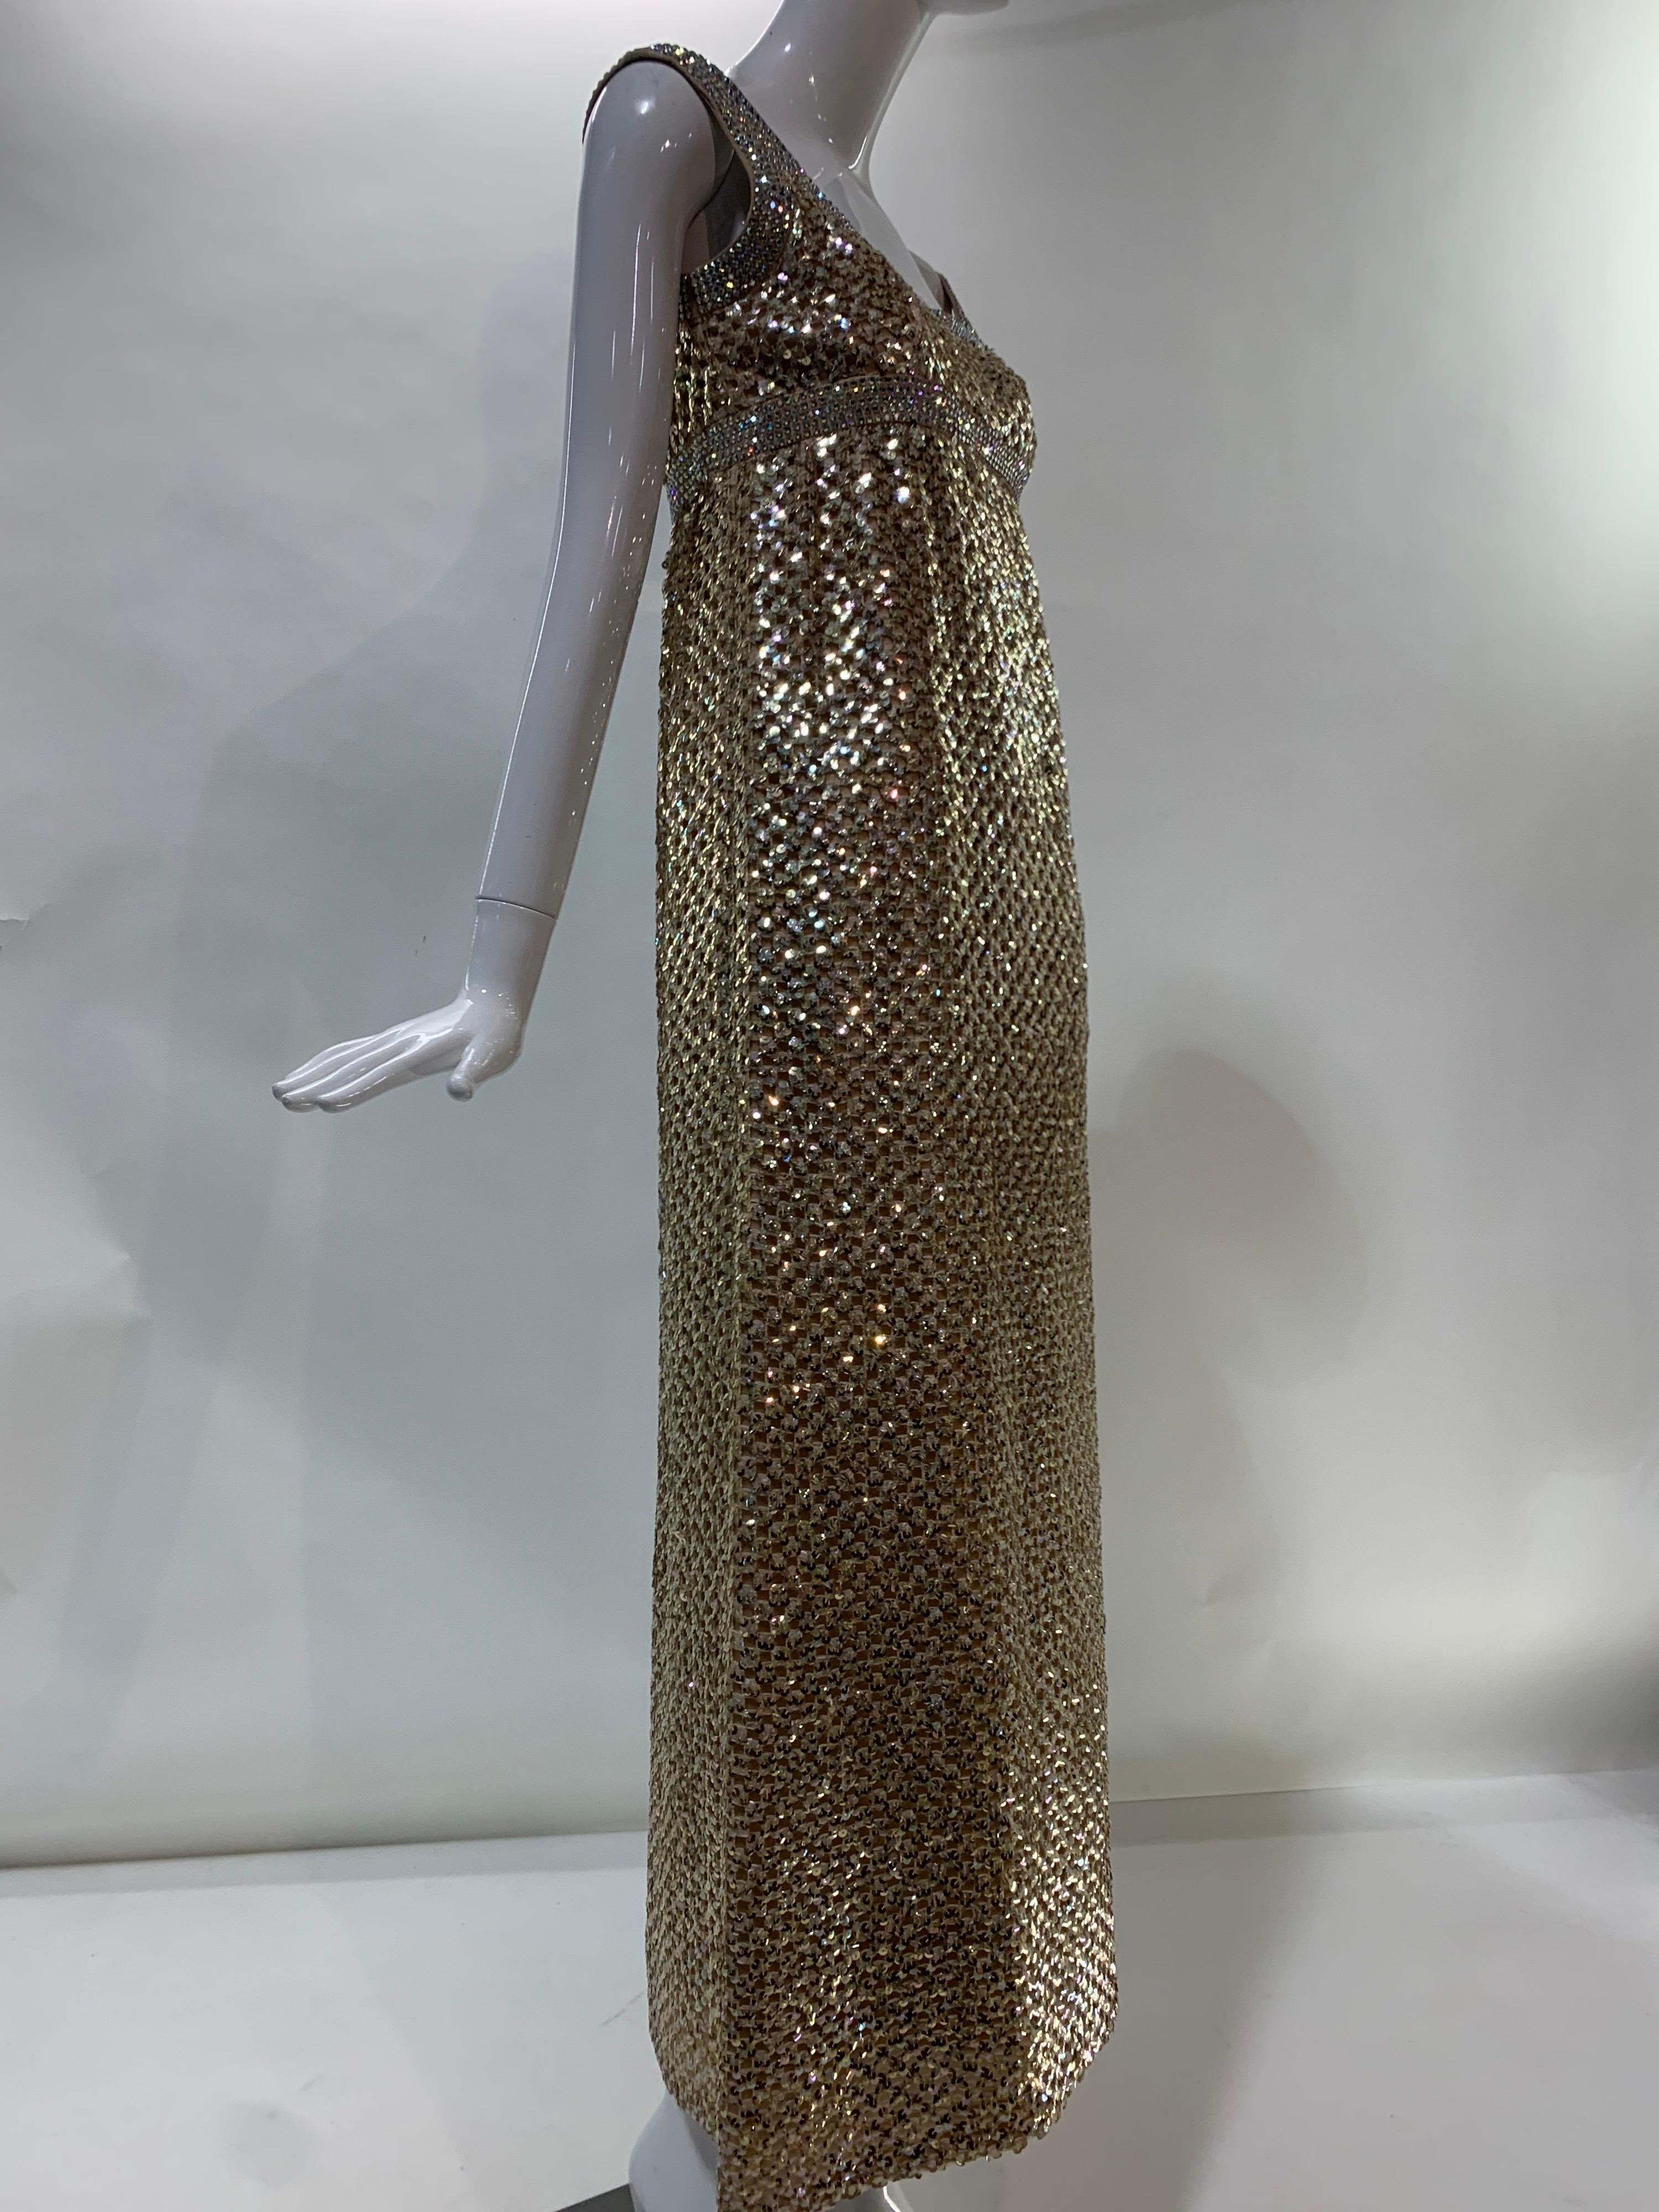 1960s Mod Empire Waist Gown in Gold Sequin Lattice and Iridescent Rhinestones For Sale 2